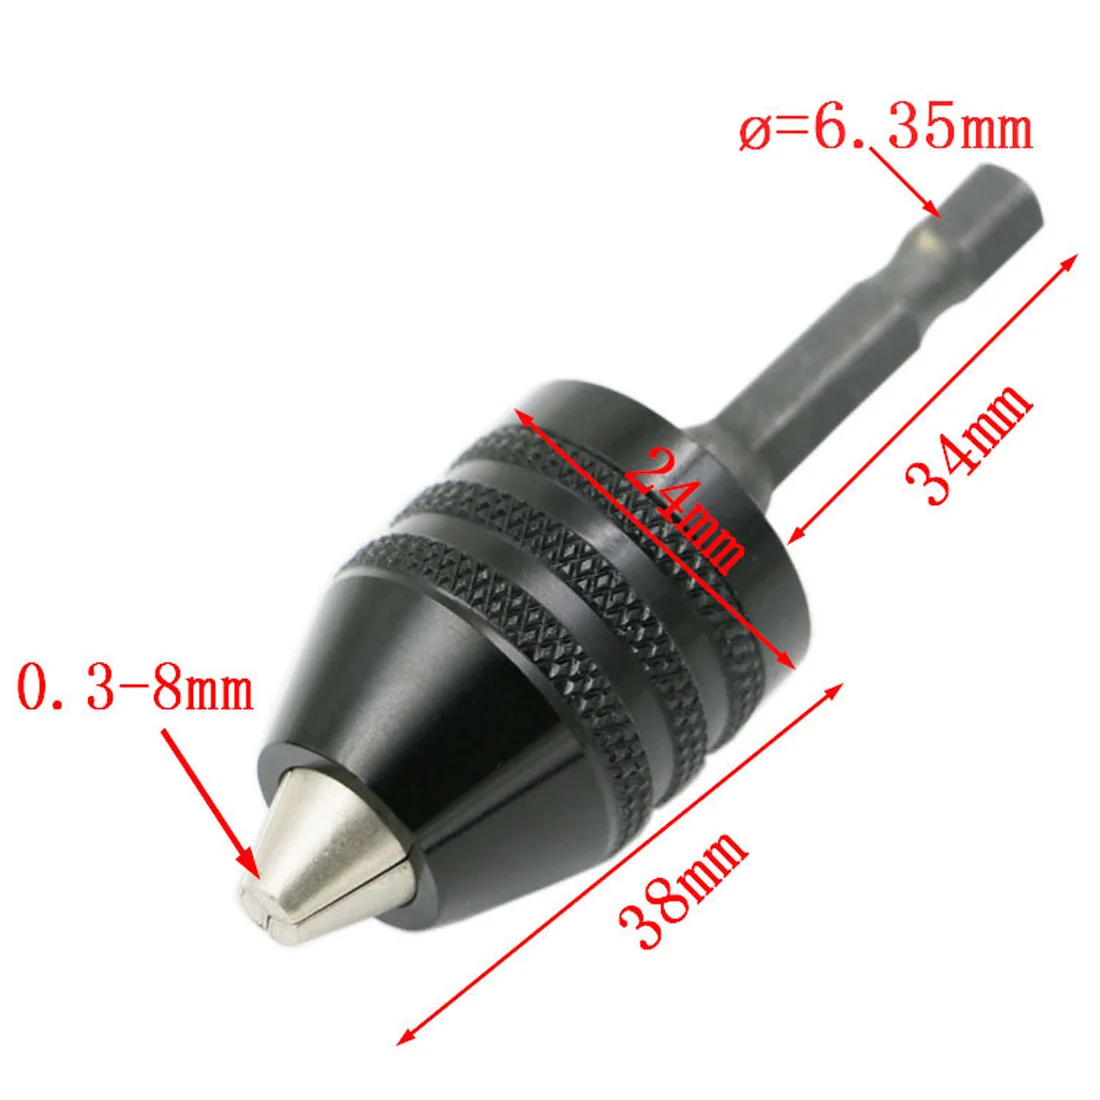 Details about   Hex Drill Bit Adapter Chuck Clamp 0.3-8mm Electric Fixture 1/4 ''Hex Shank Drill 